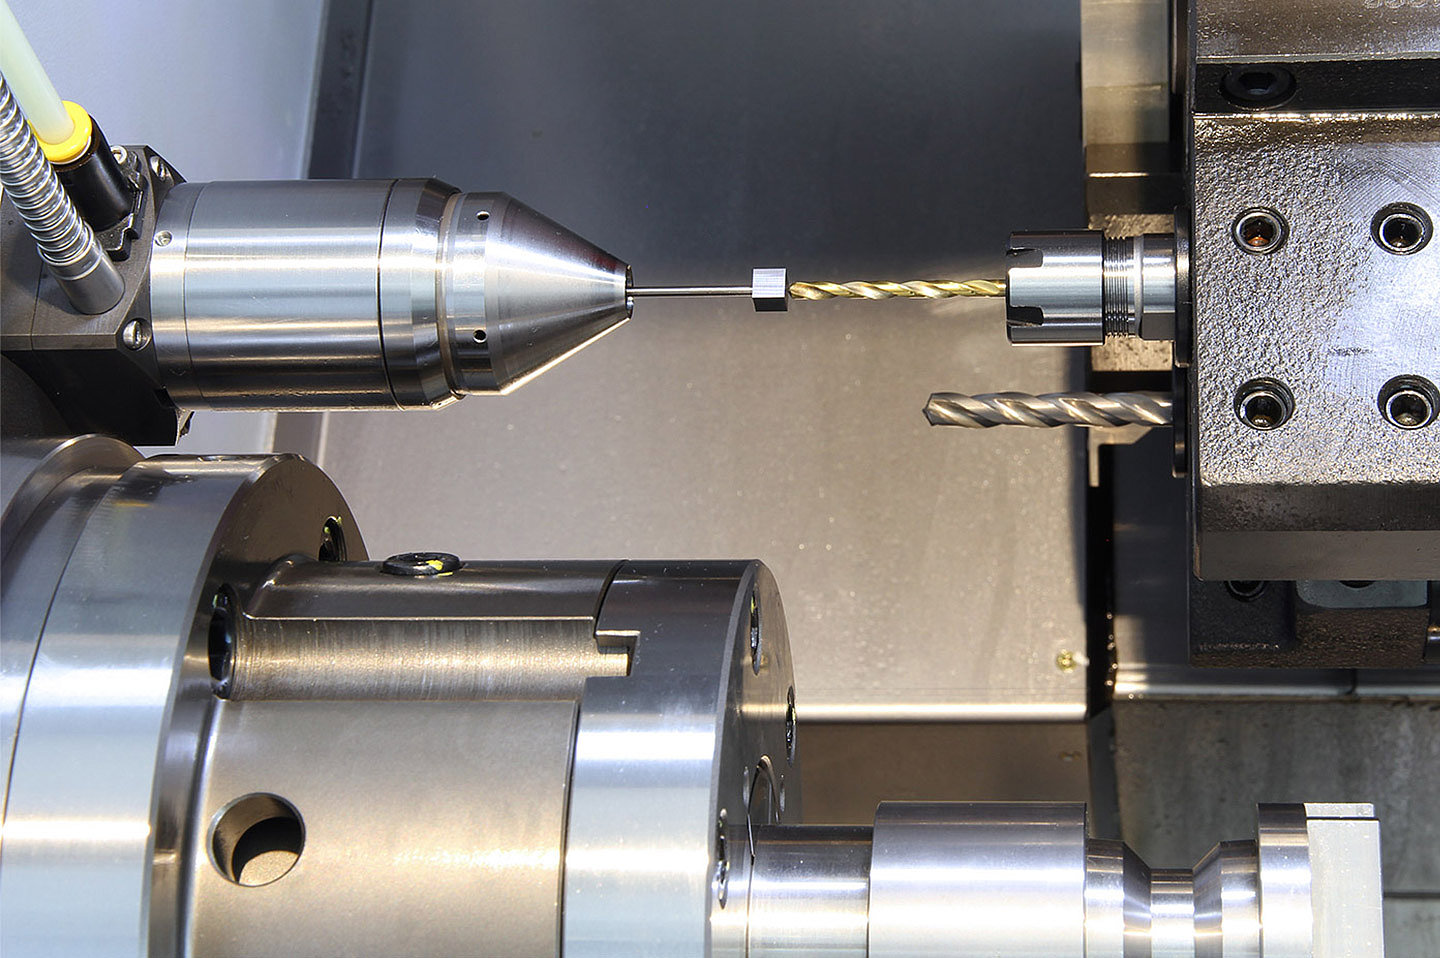 TC76 touch probe in tool measurement in a lathe